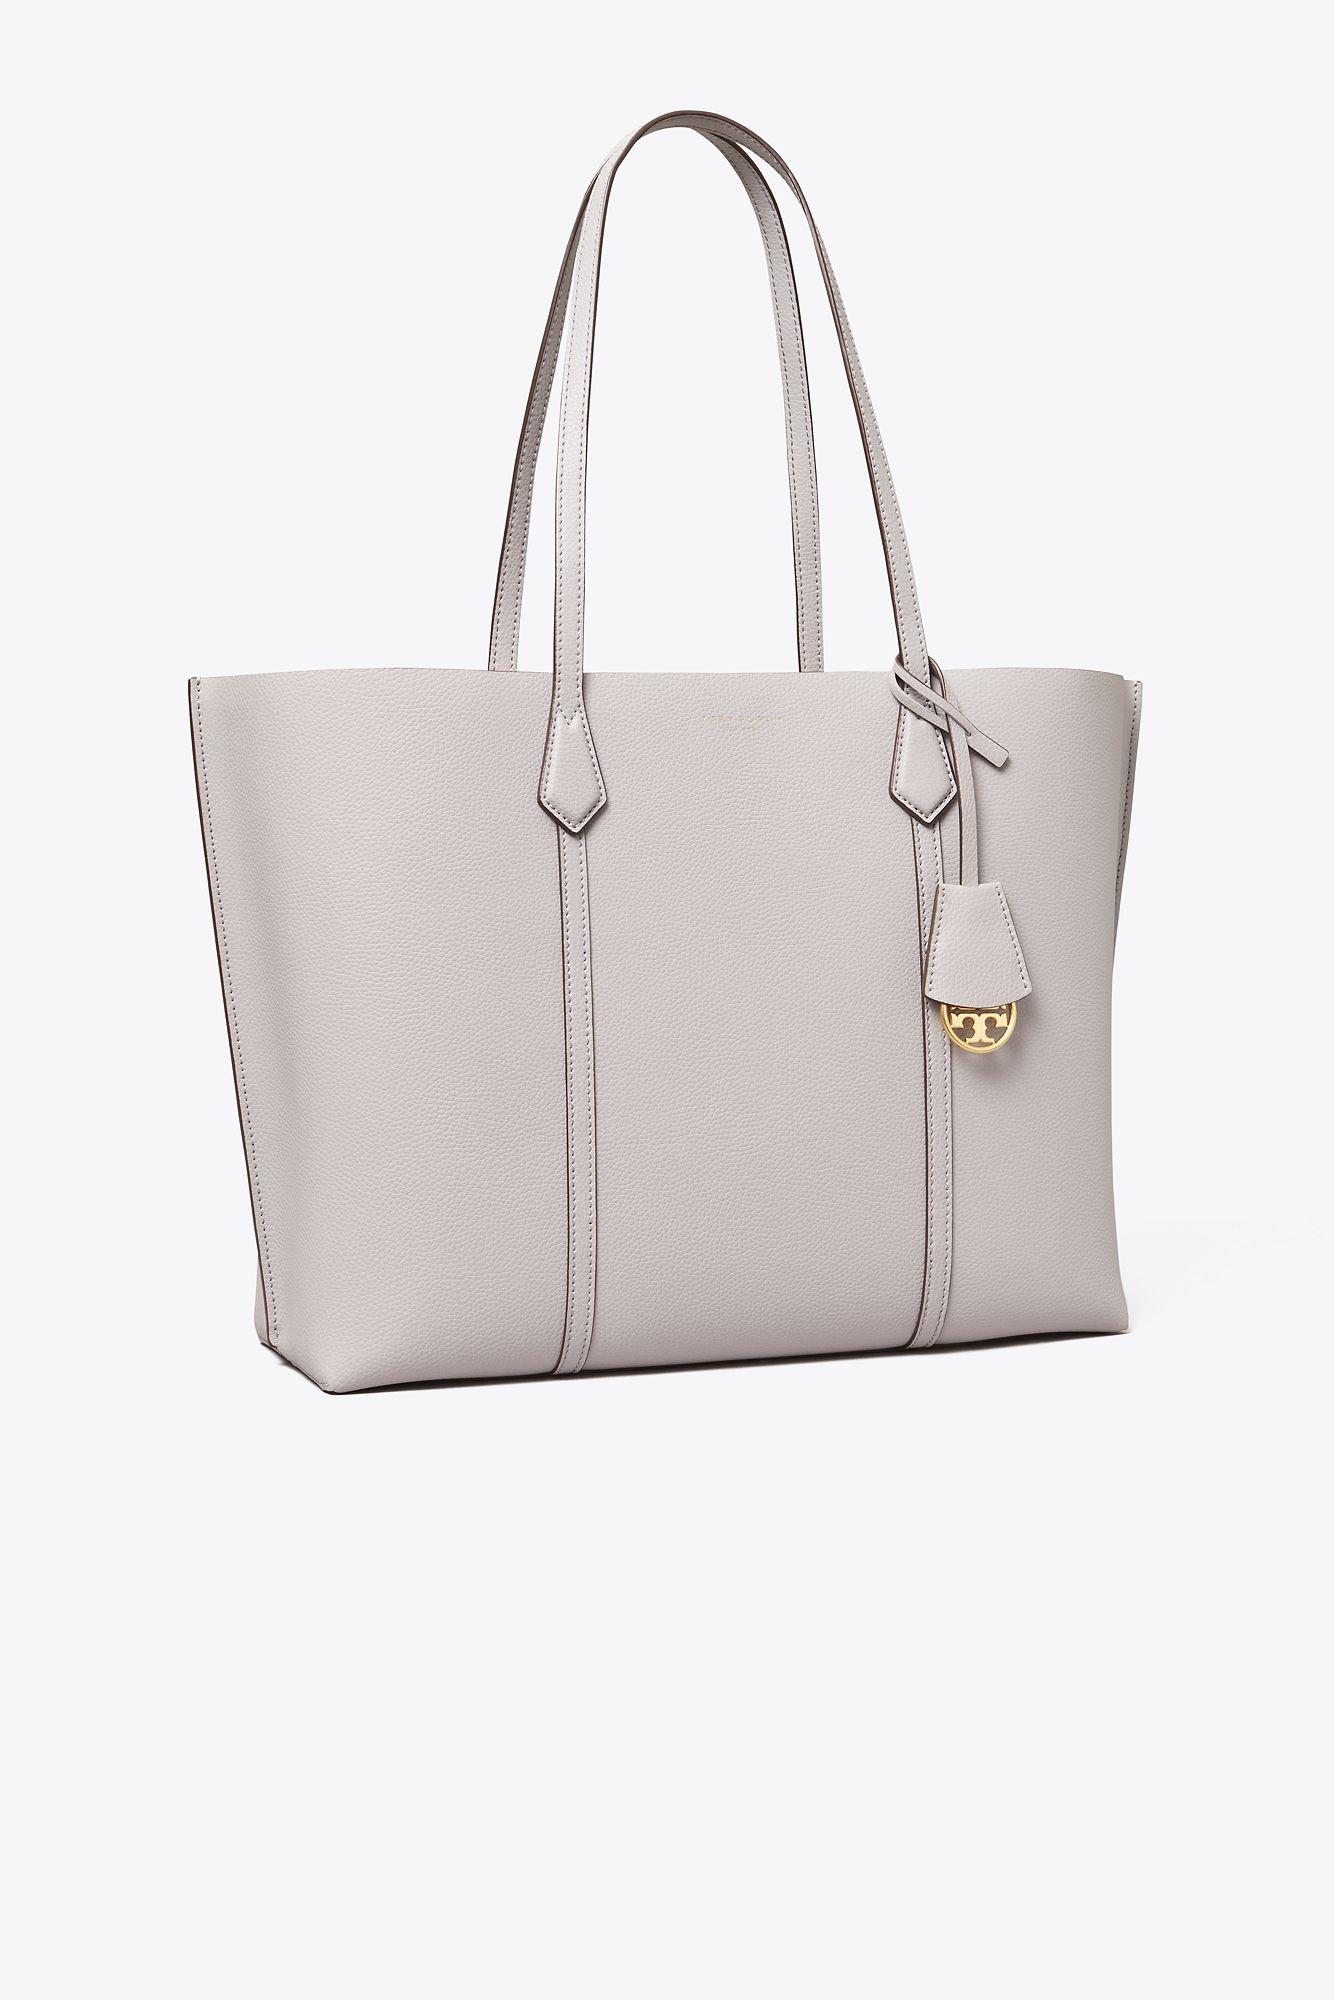  Tory Burch Women's Perry Triple Compartment Tote, Clam Shell,  Grey, One Size : Tory Burch: Clothing, Shoes & Jewelry